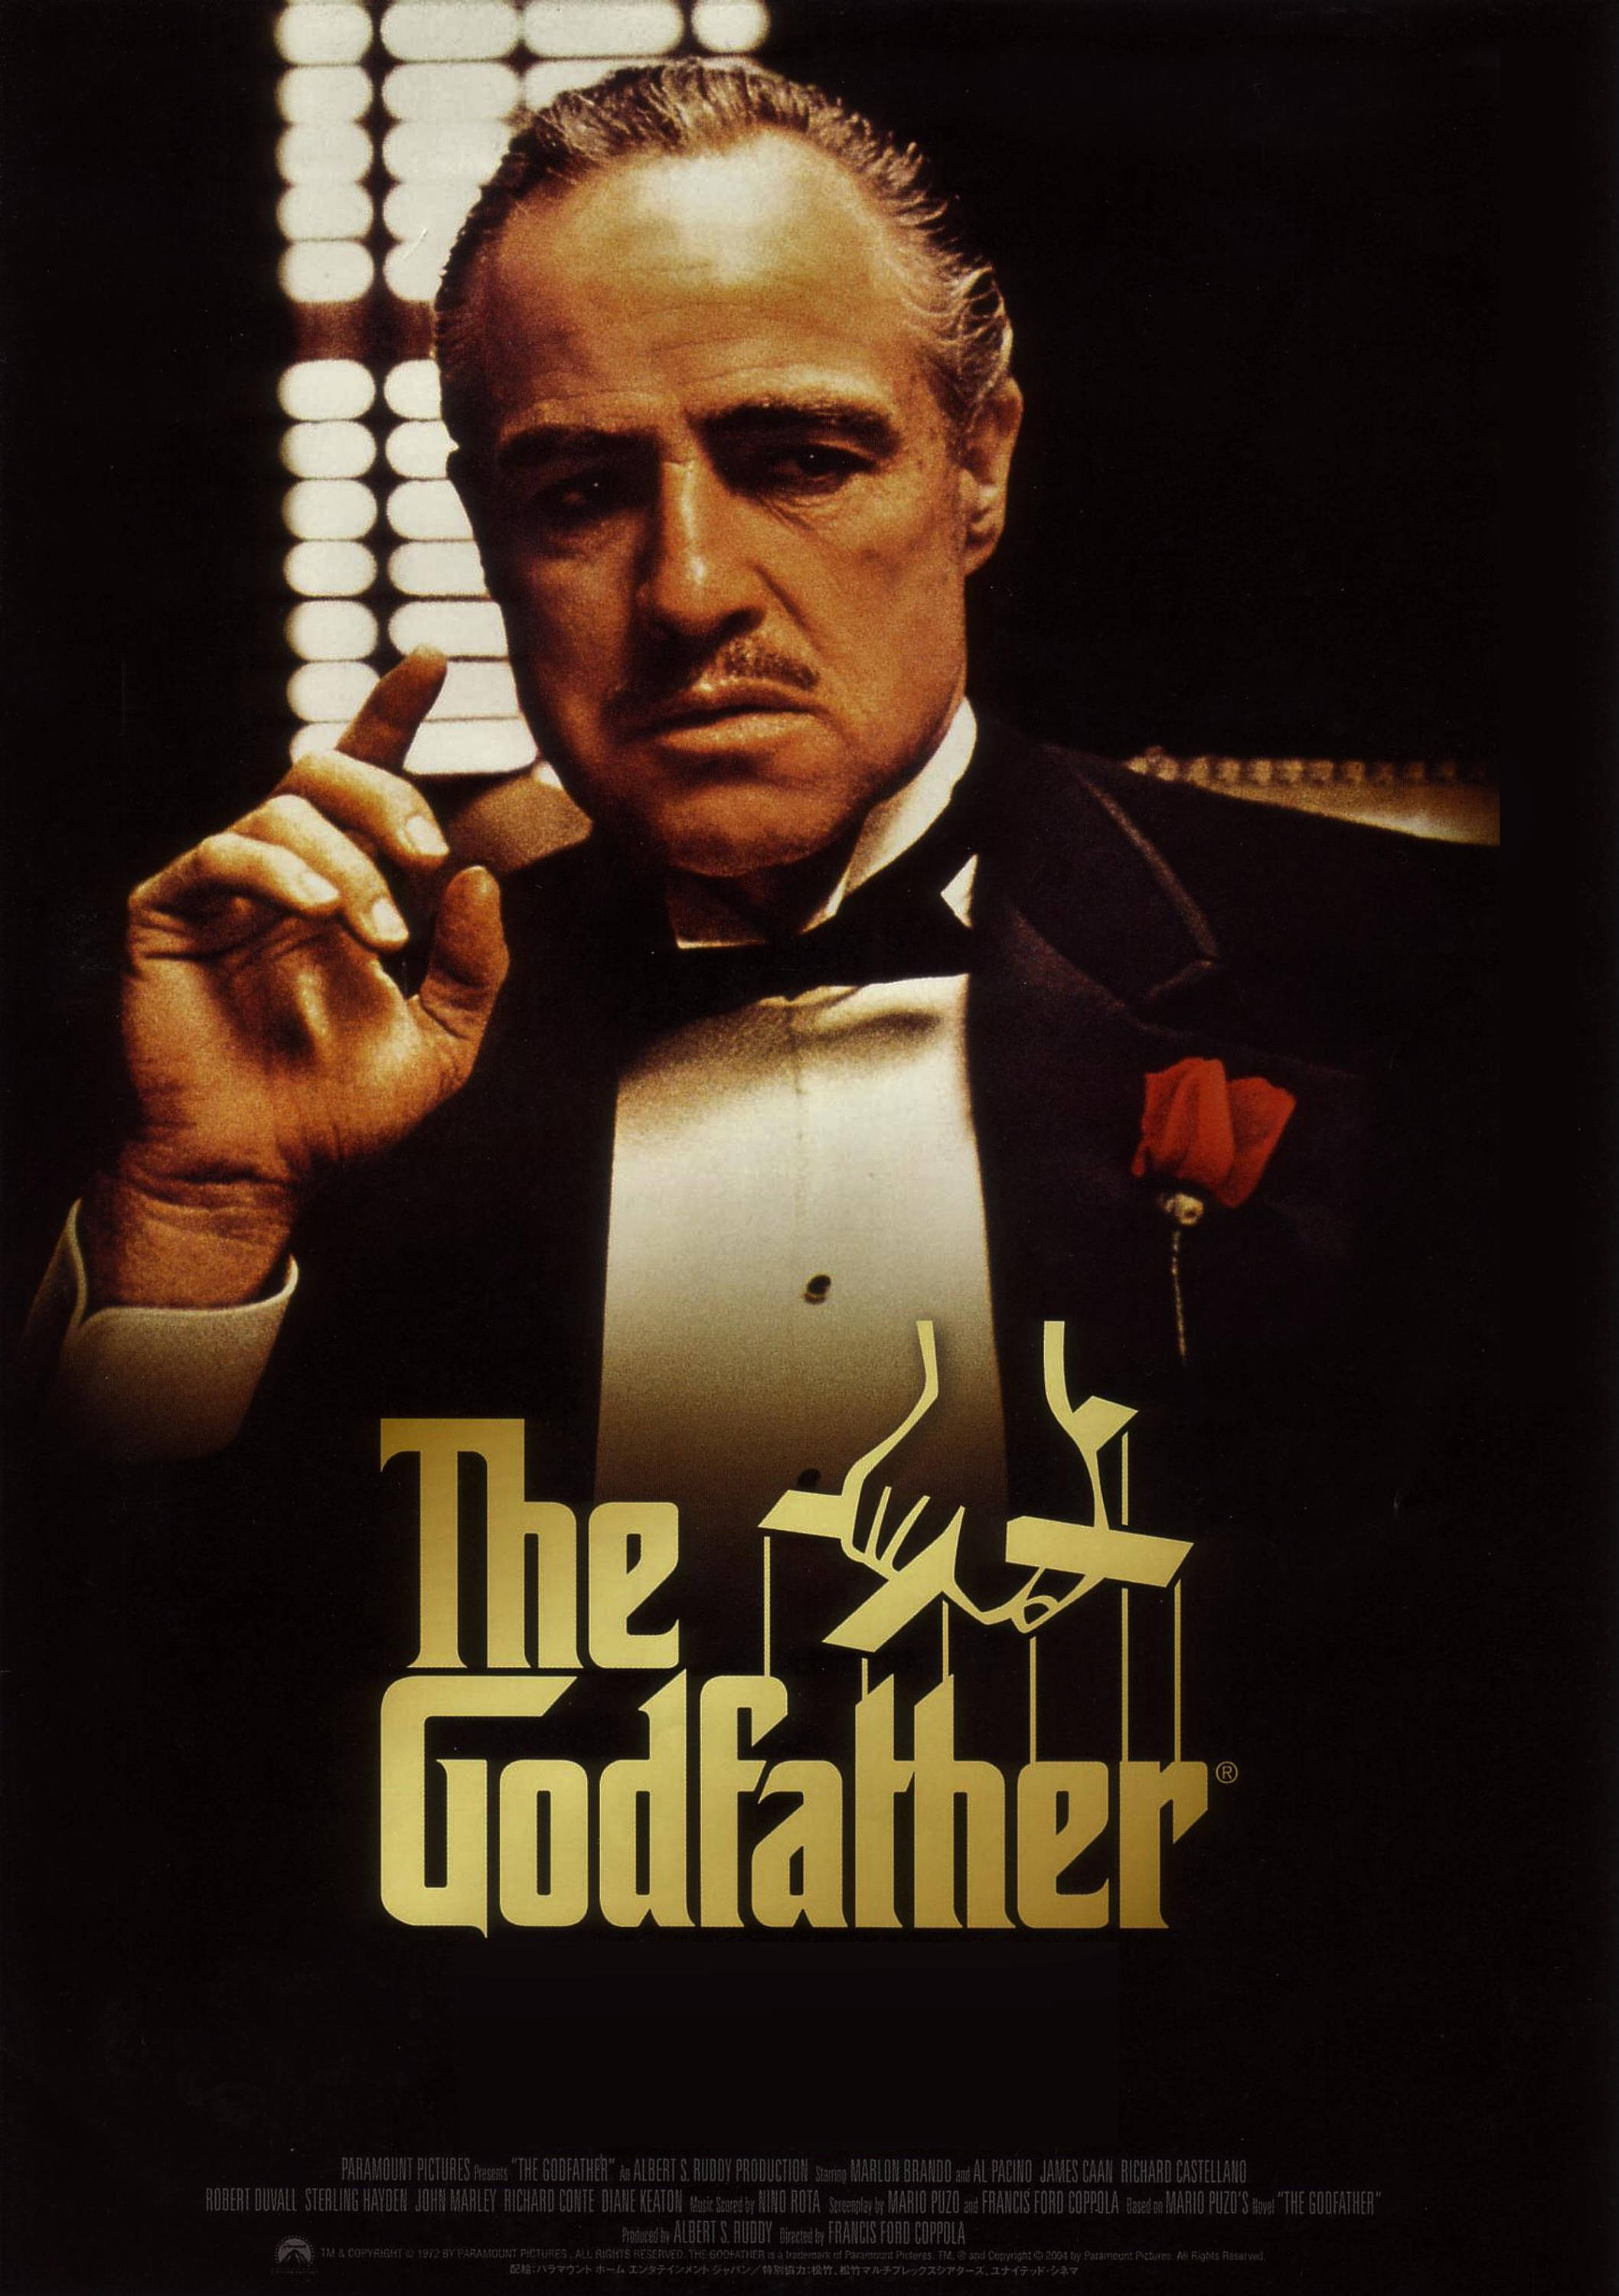  The Godfather Review